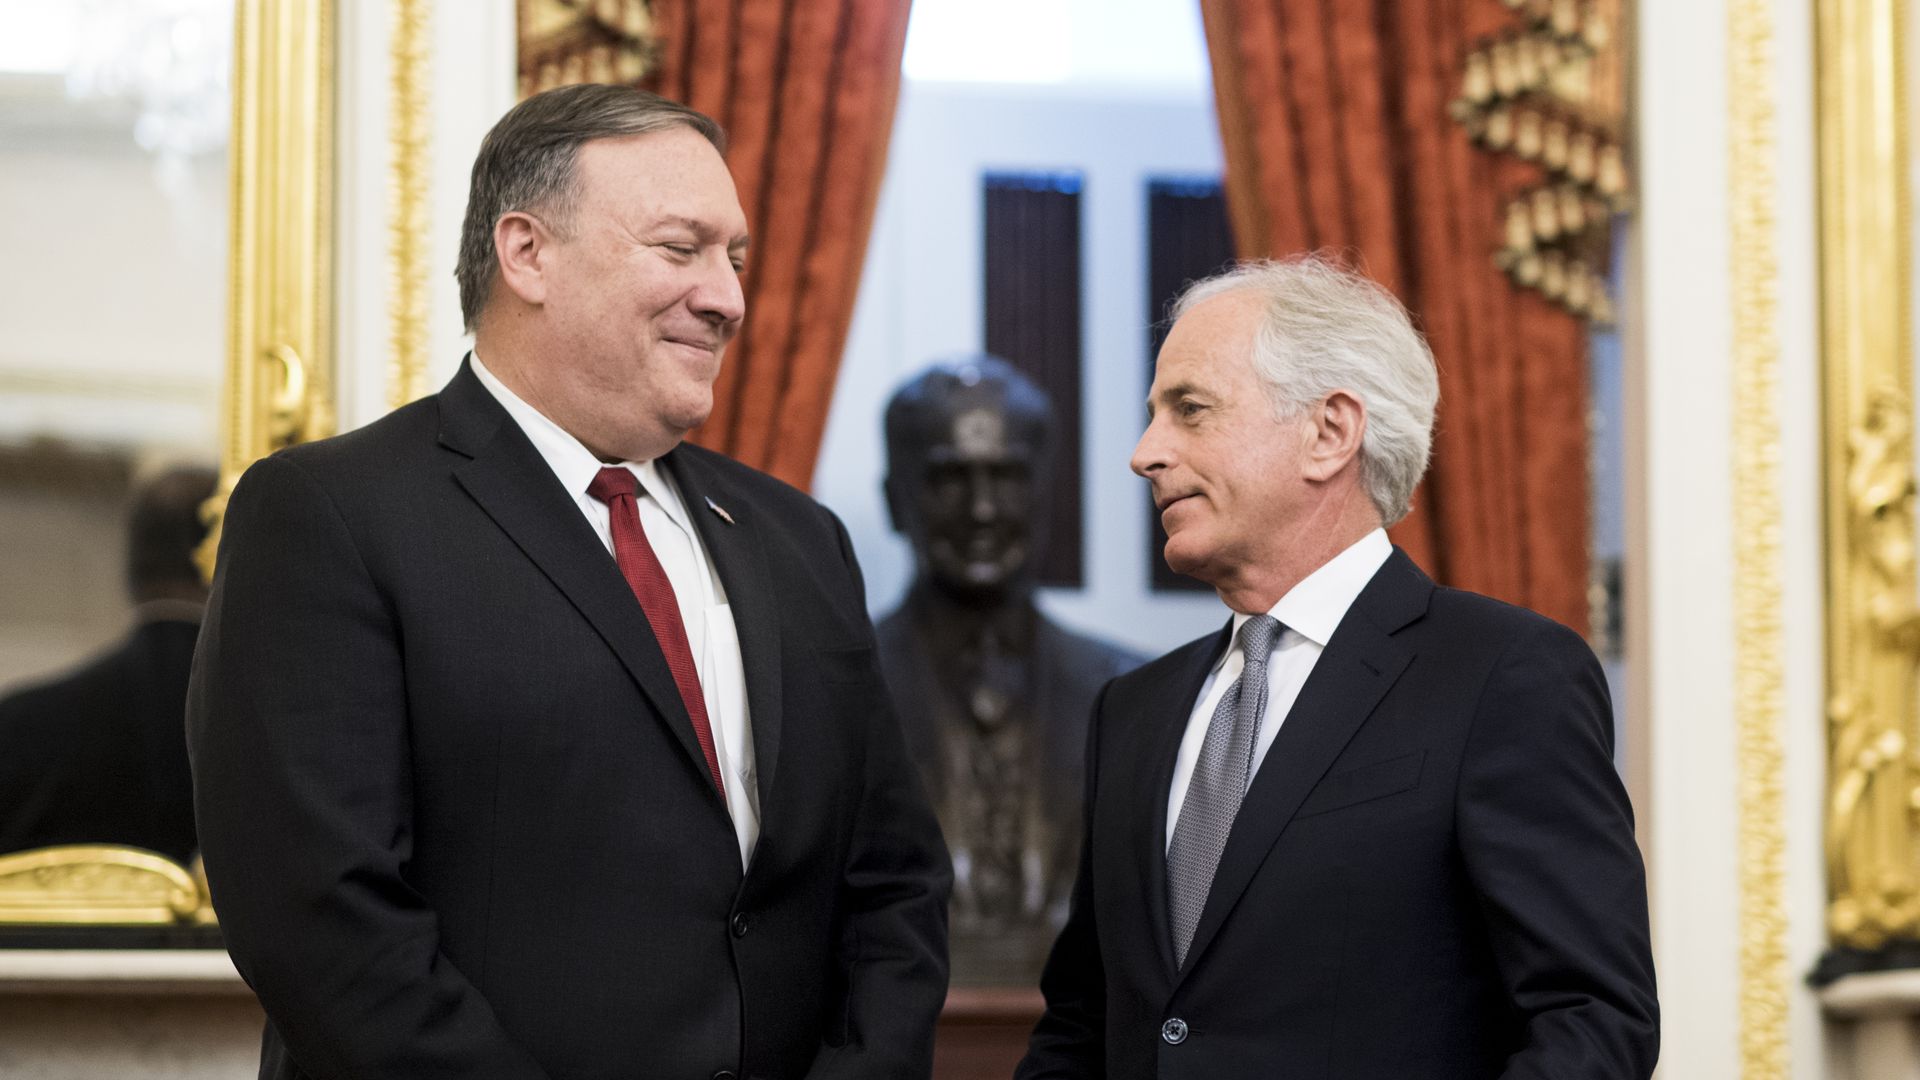 Mike Pompeo and Bob Corker in conversation